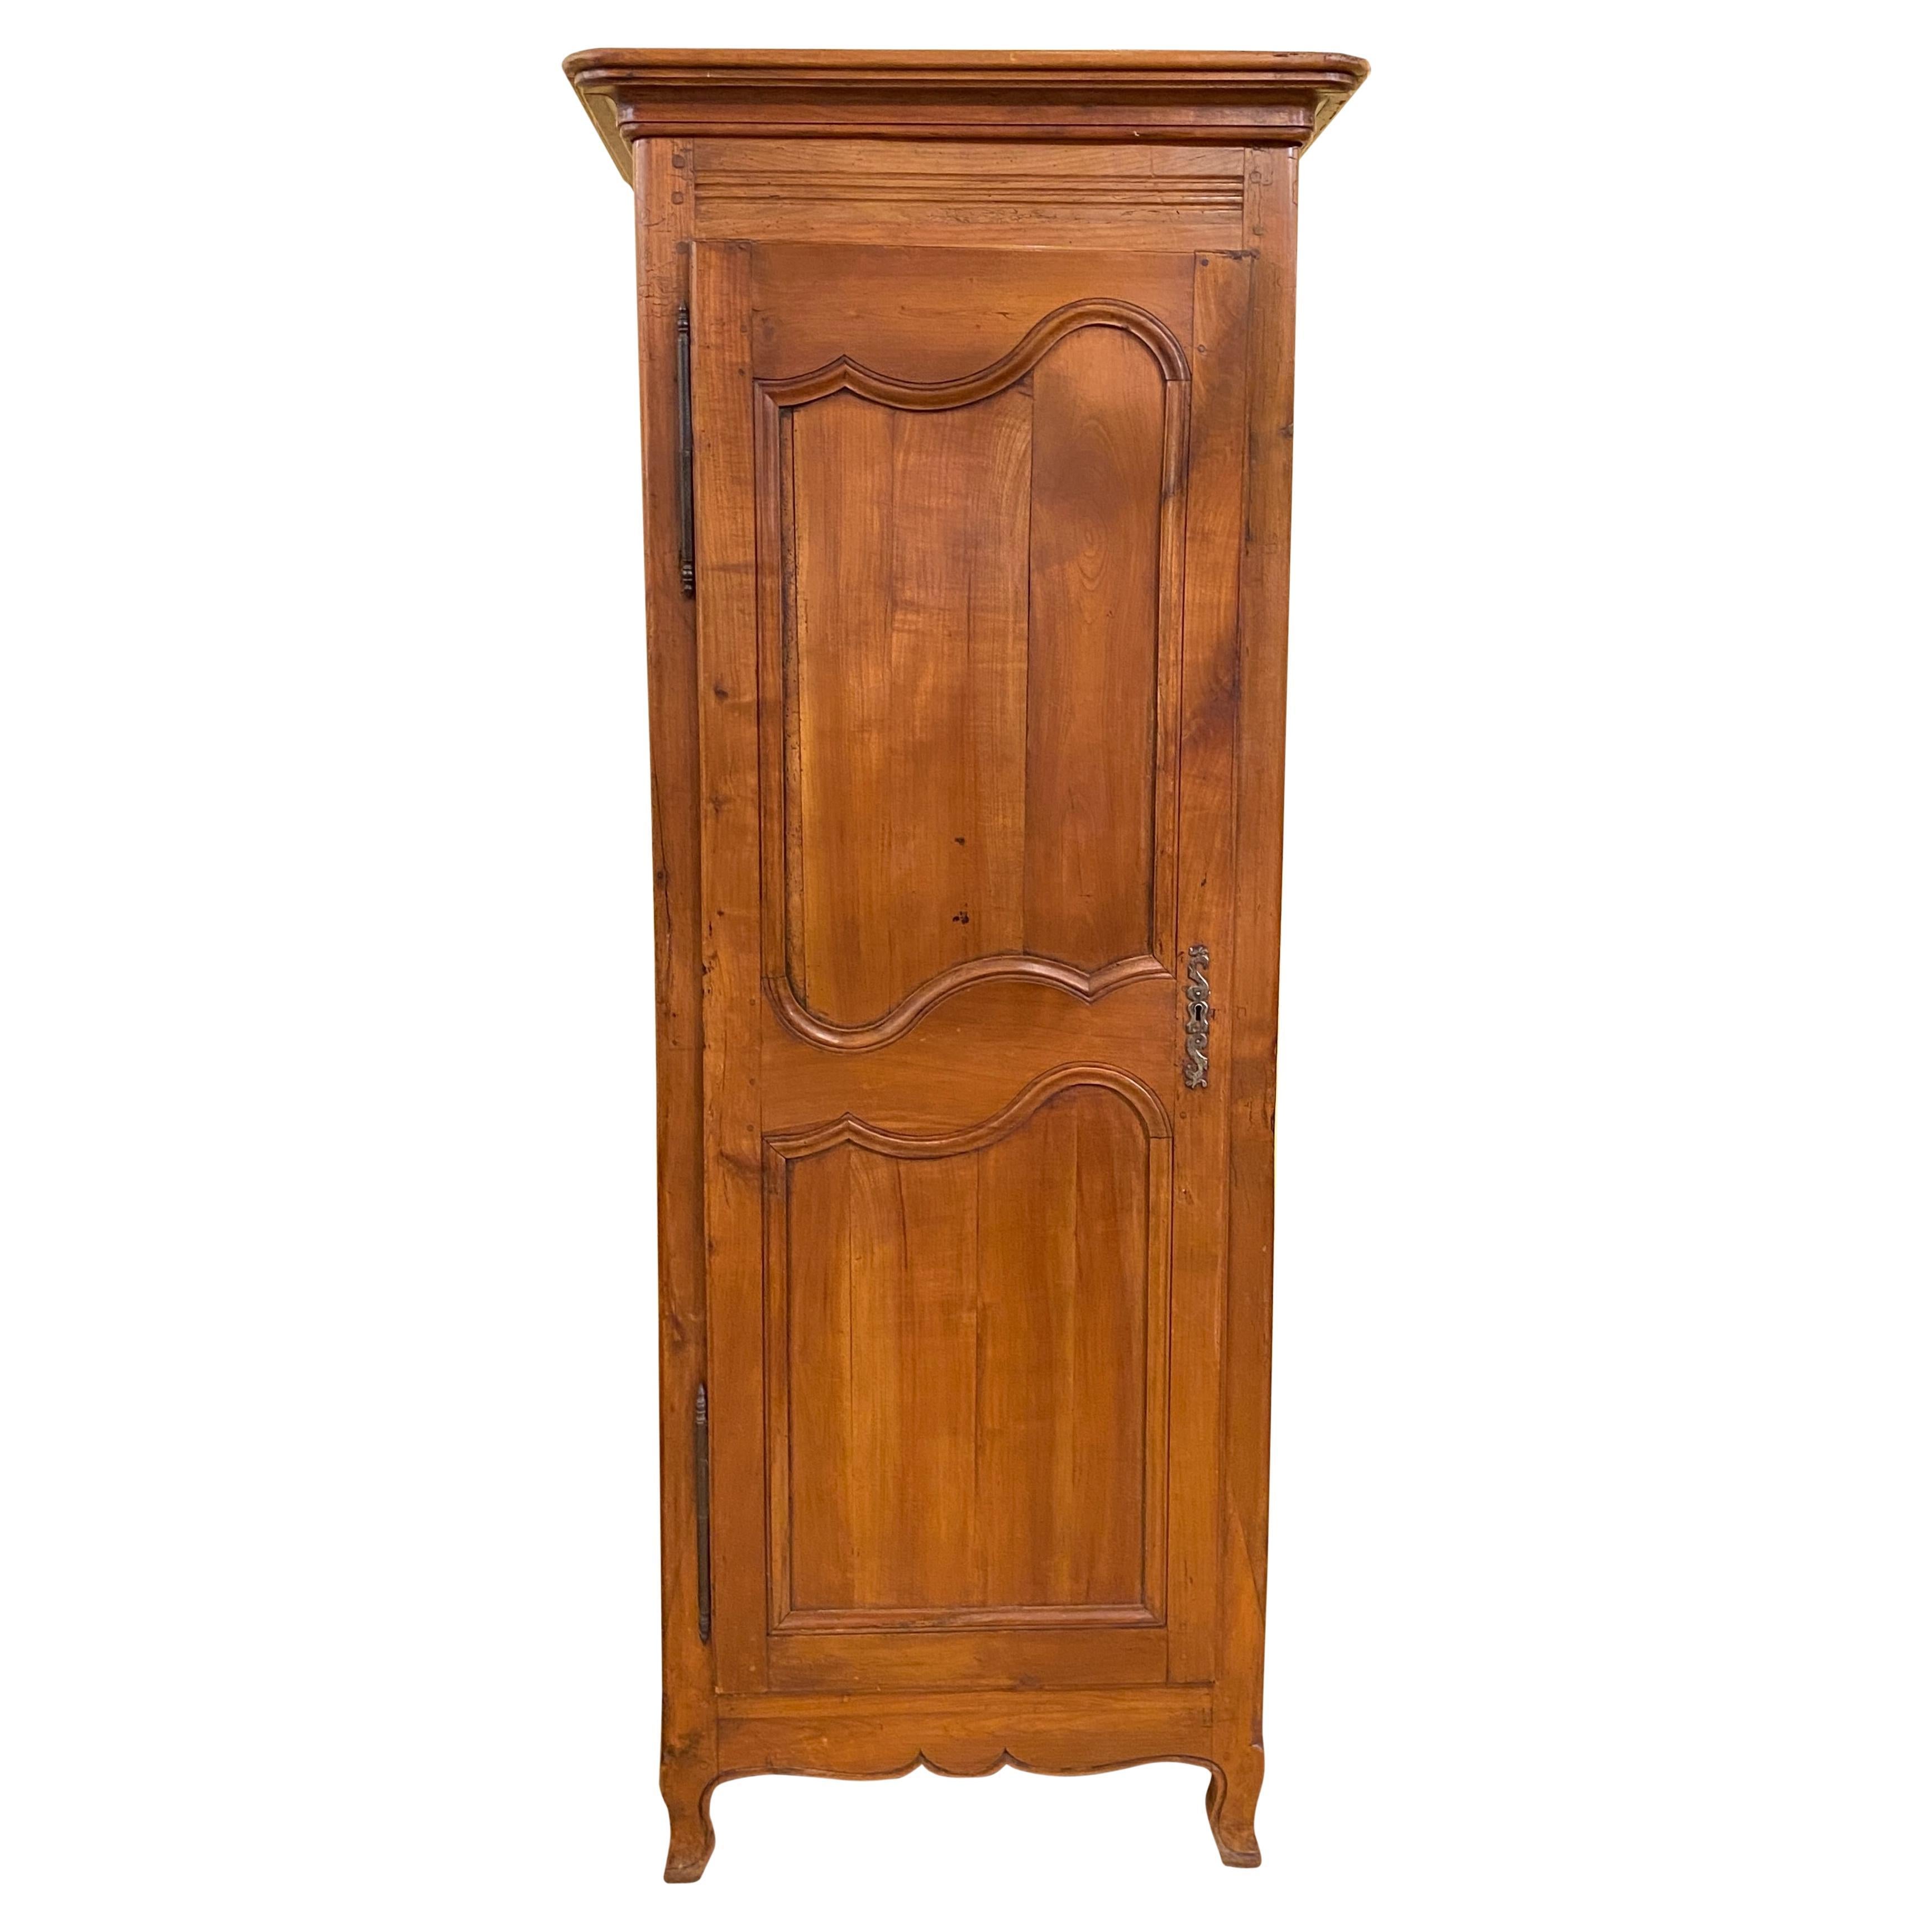 18th Century French Cherry Wood Bonnetiere Hat Cabinet